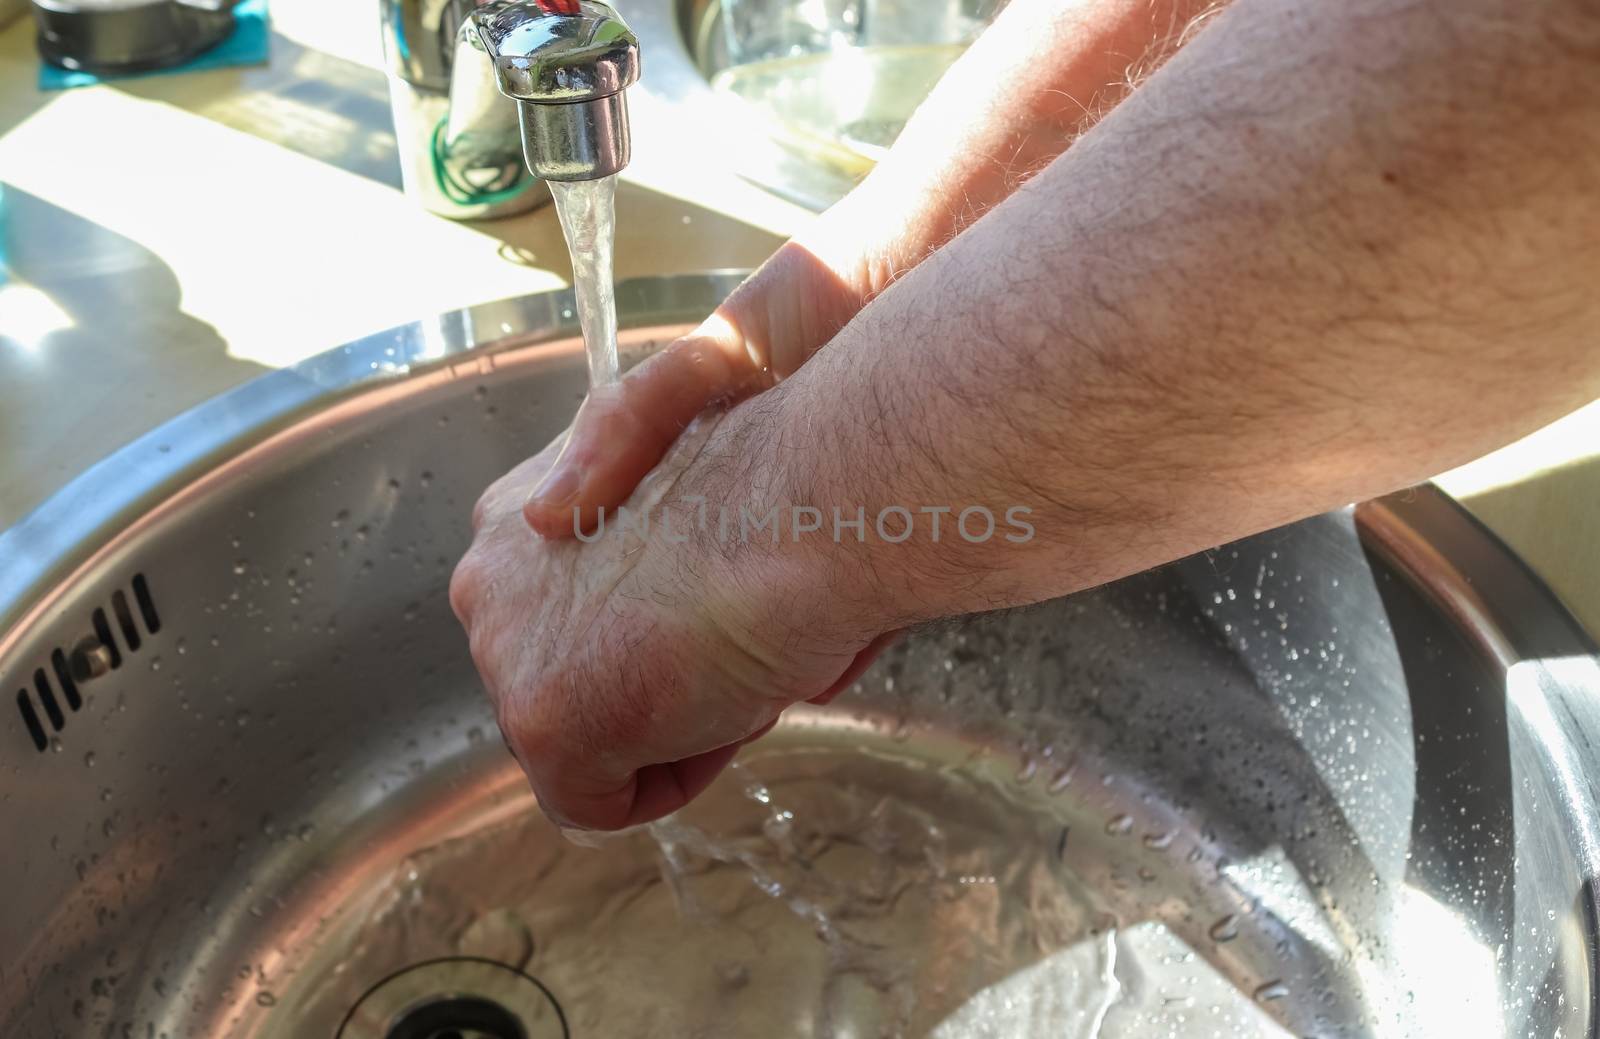 Cleaning and washing hands with soap prevention for outbreak of coronavirus covid-19 by MP_foto71